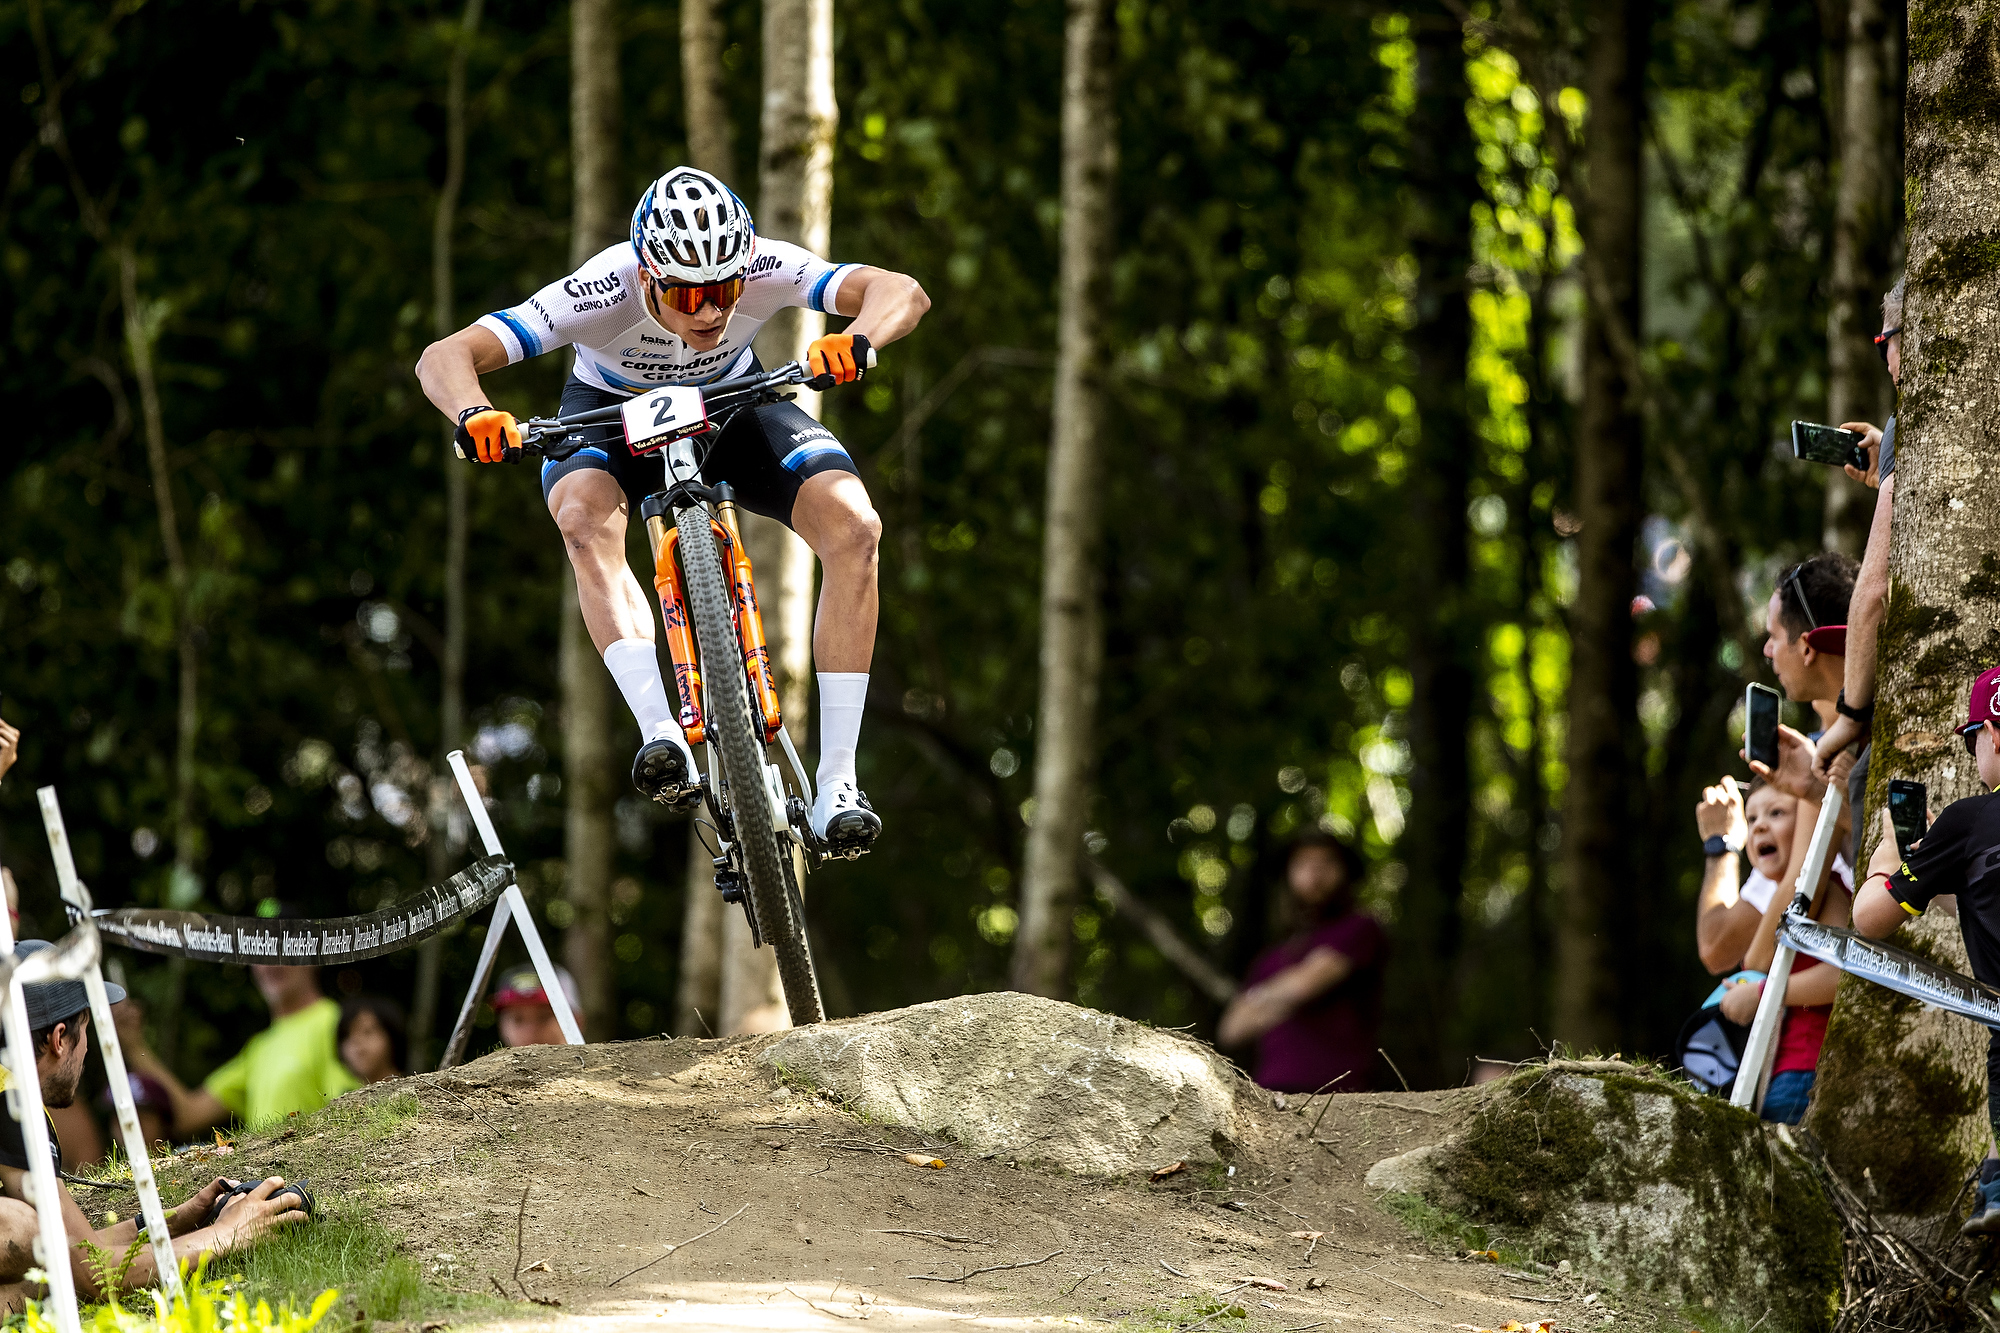 Mathieu glides straight and fast over a small rock feature.